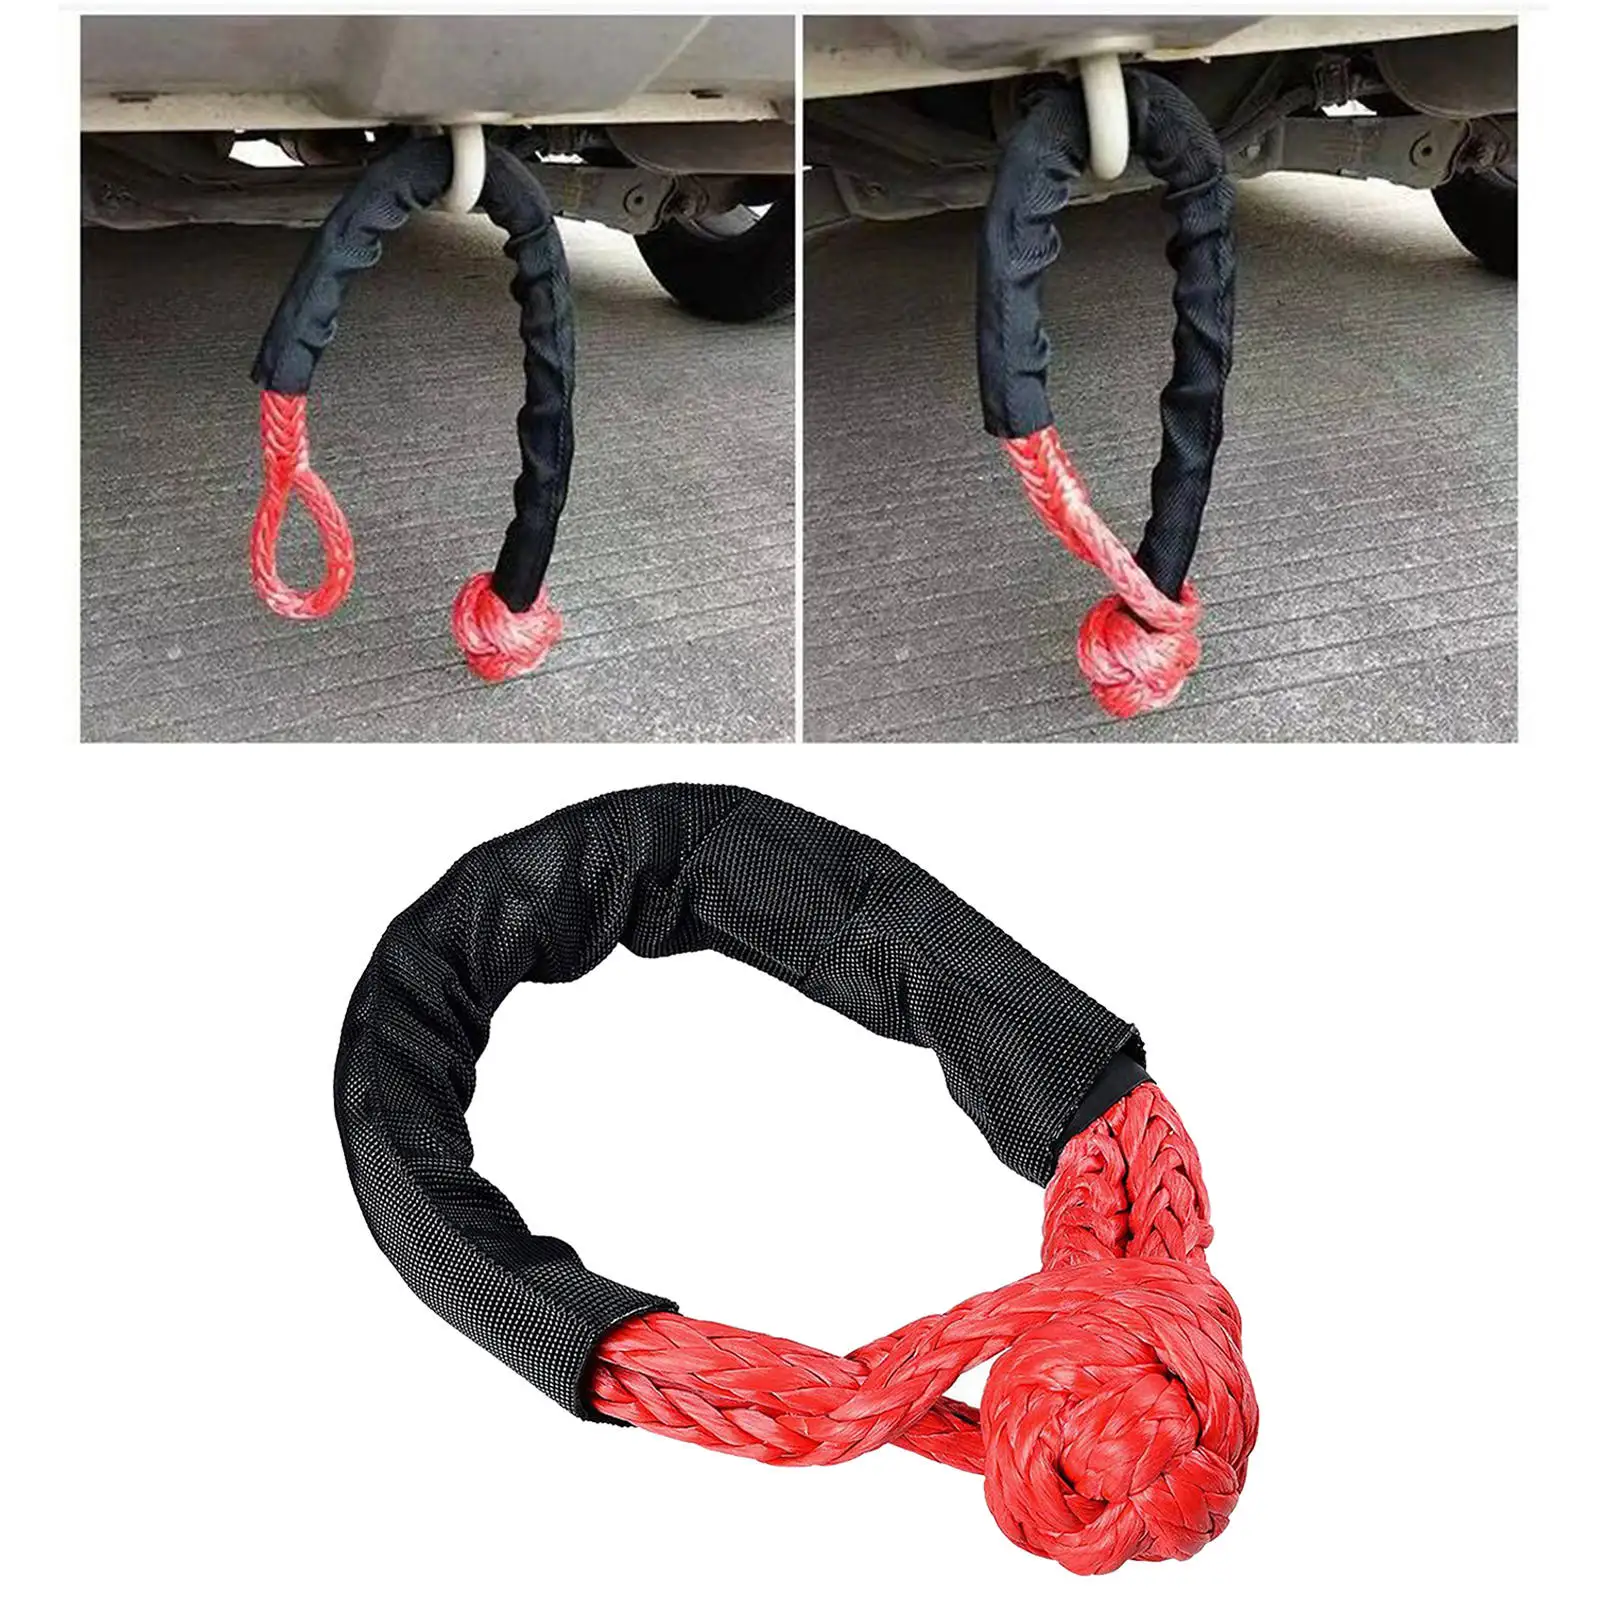 Break Strength Synthetic Soft Shackle Rugged Shackles with Protective Sleeve for Vehicle Recovery